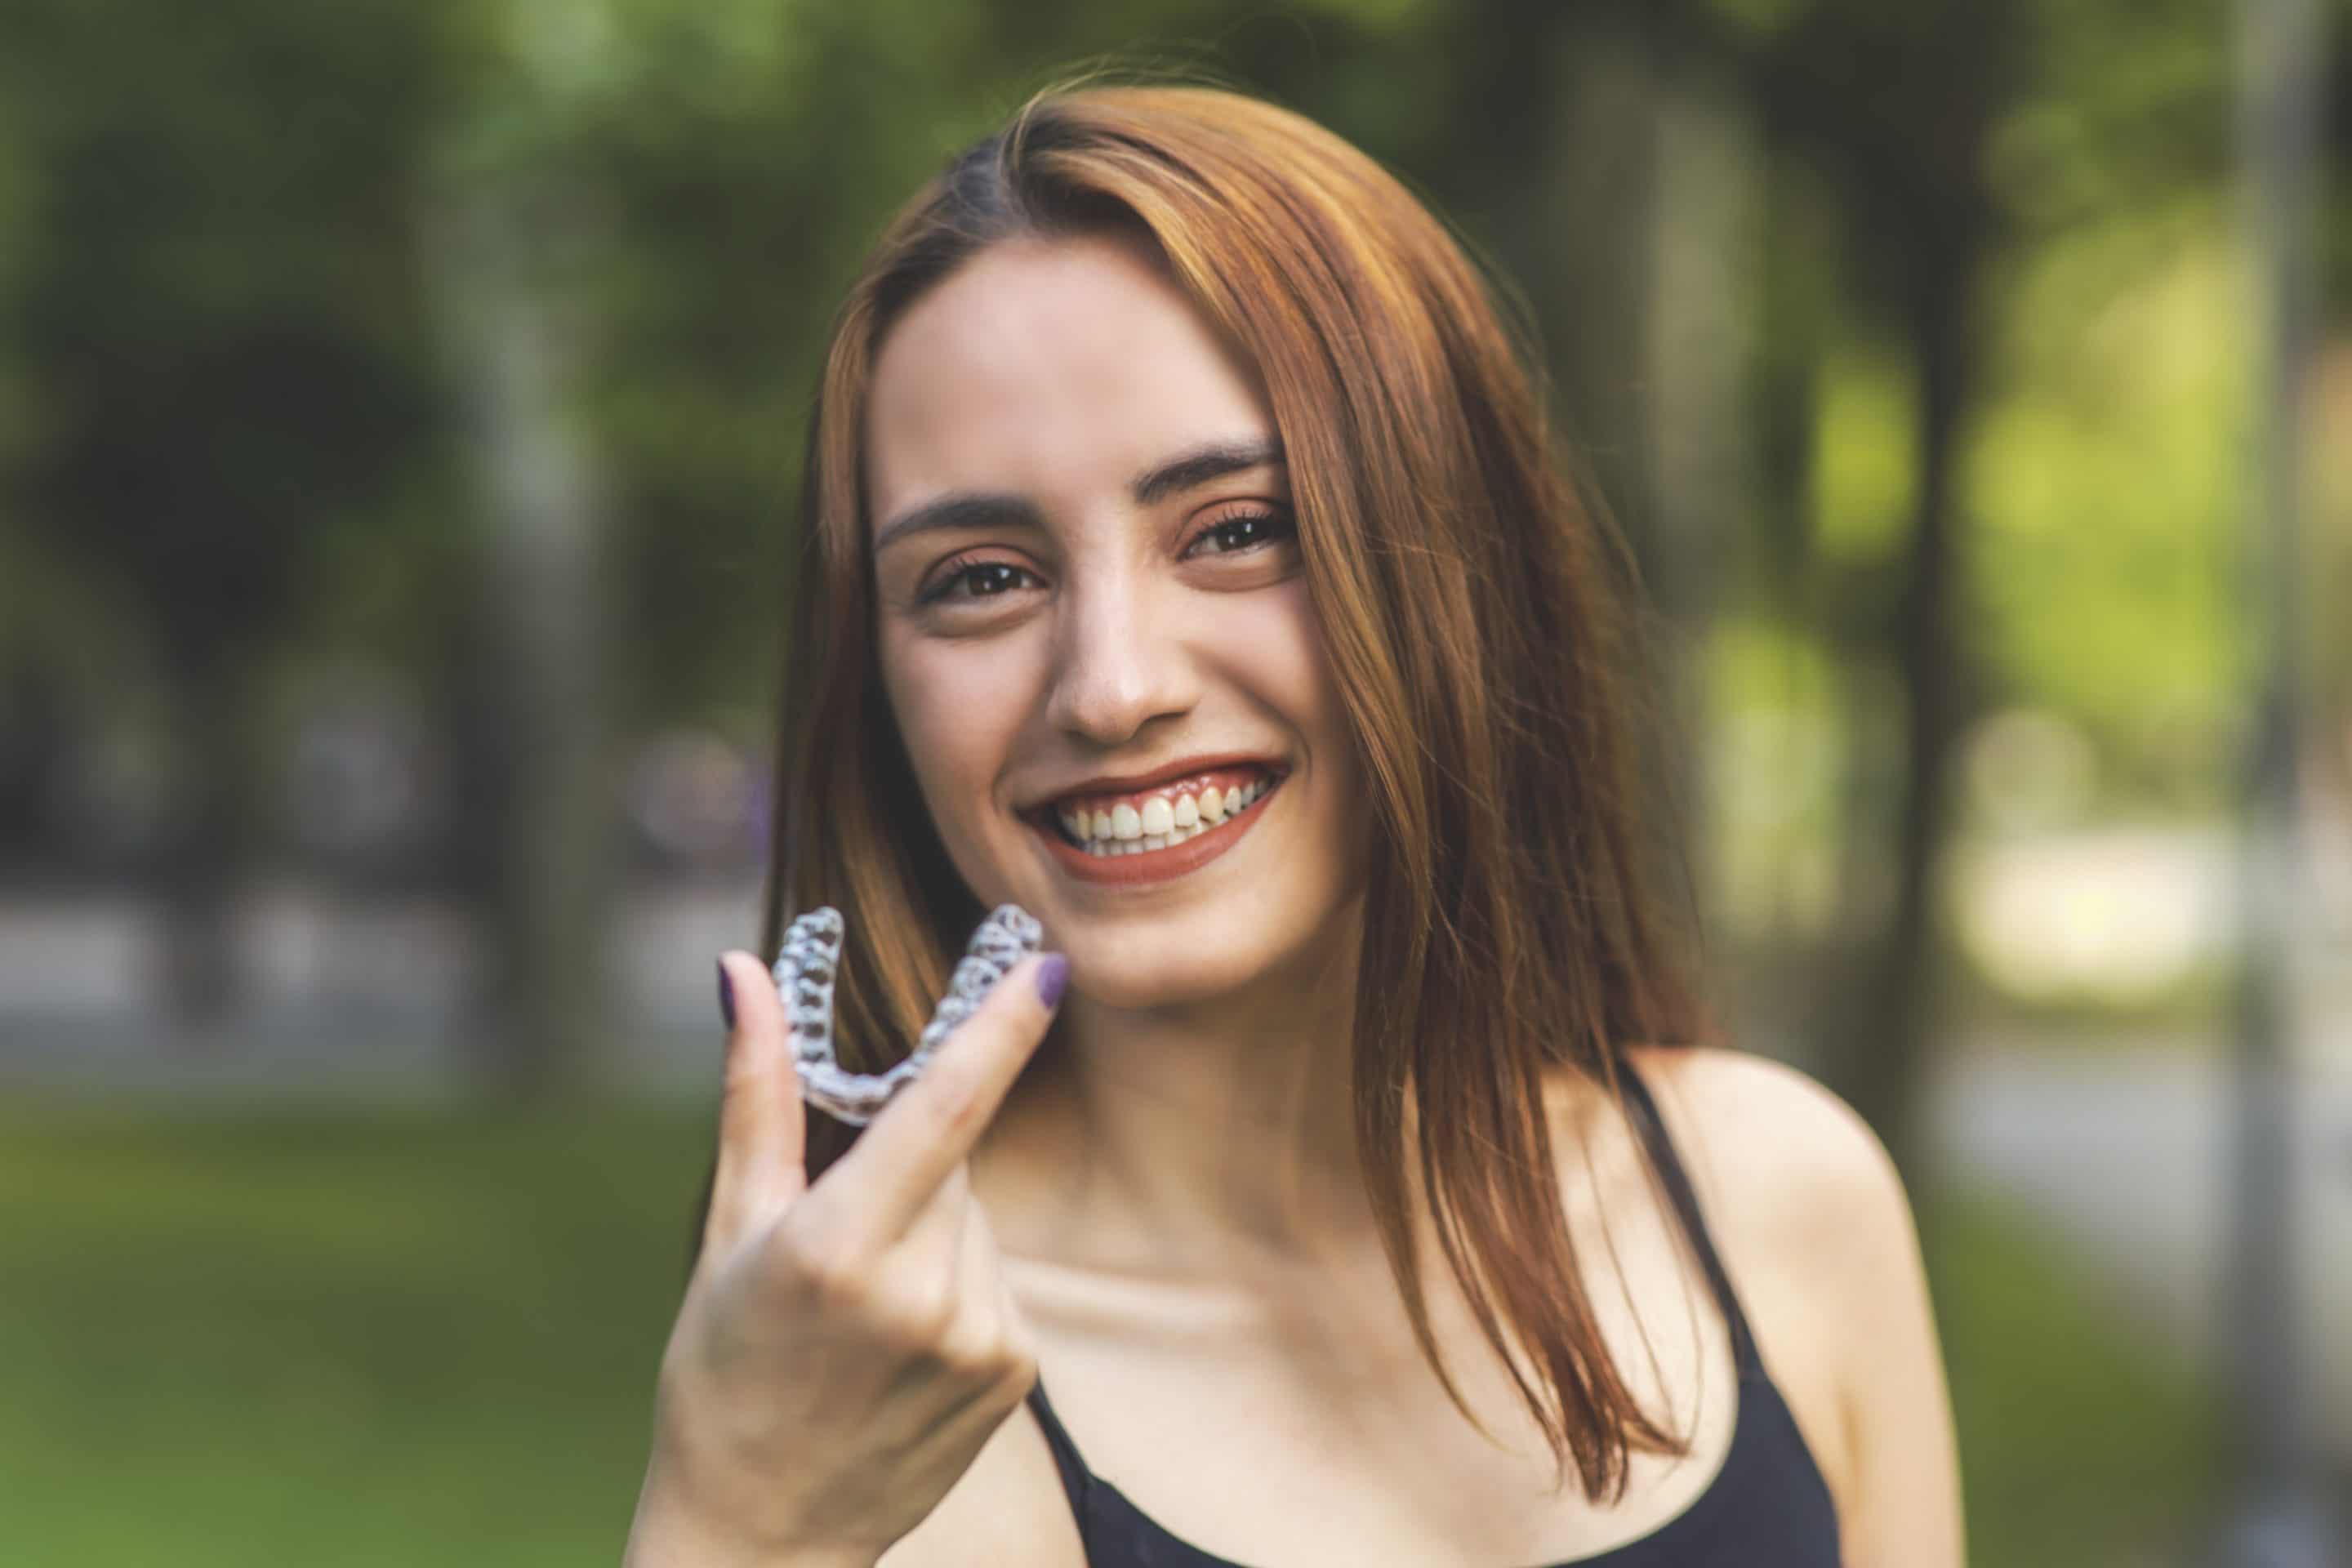 Invisalign retainers and clear aligners available at Glen Forest Dental Co. in Richmond VA